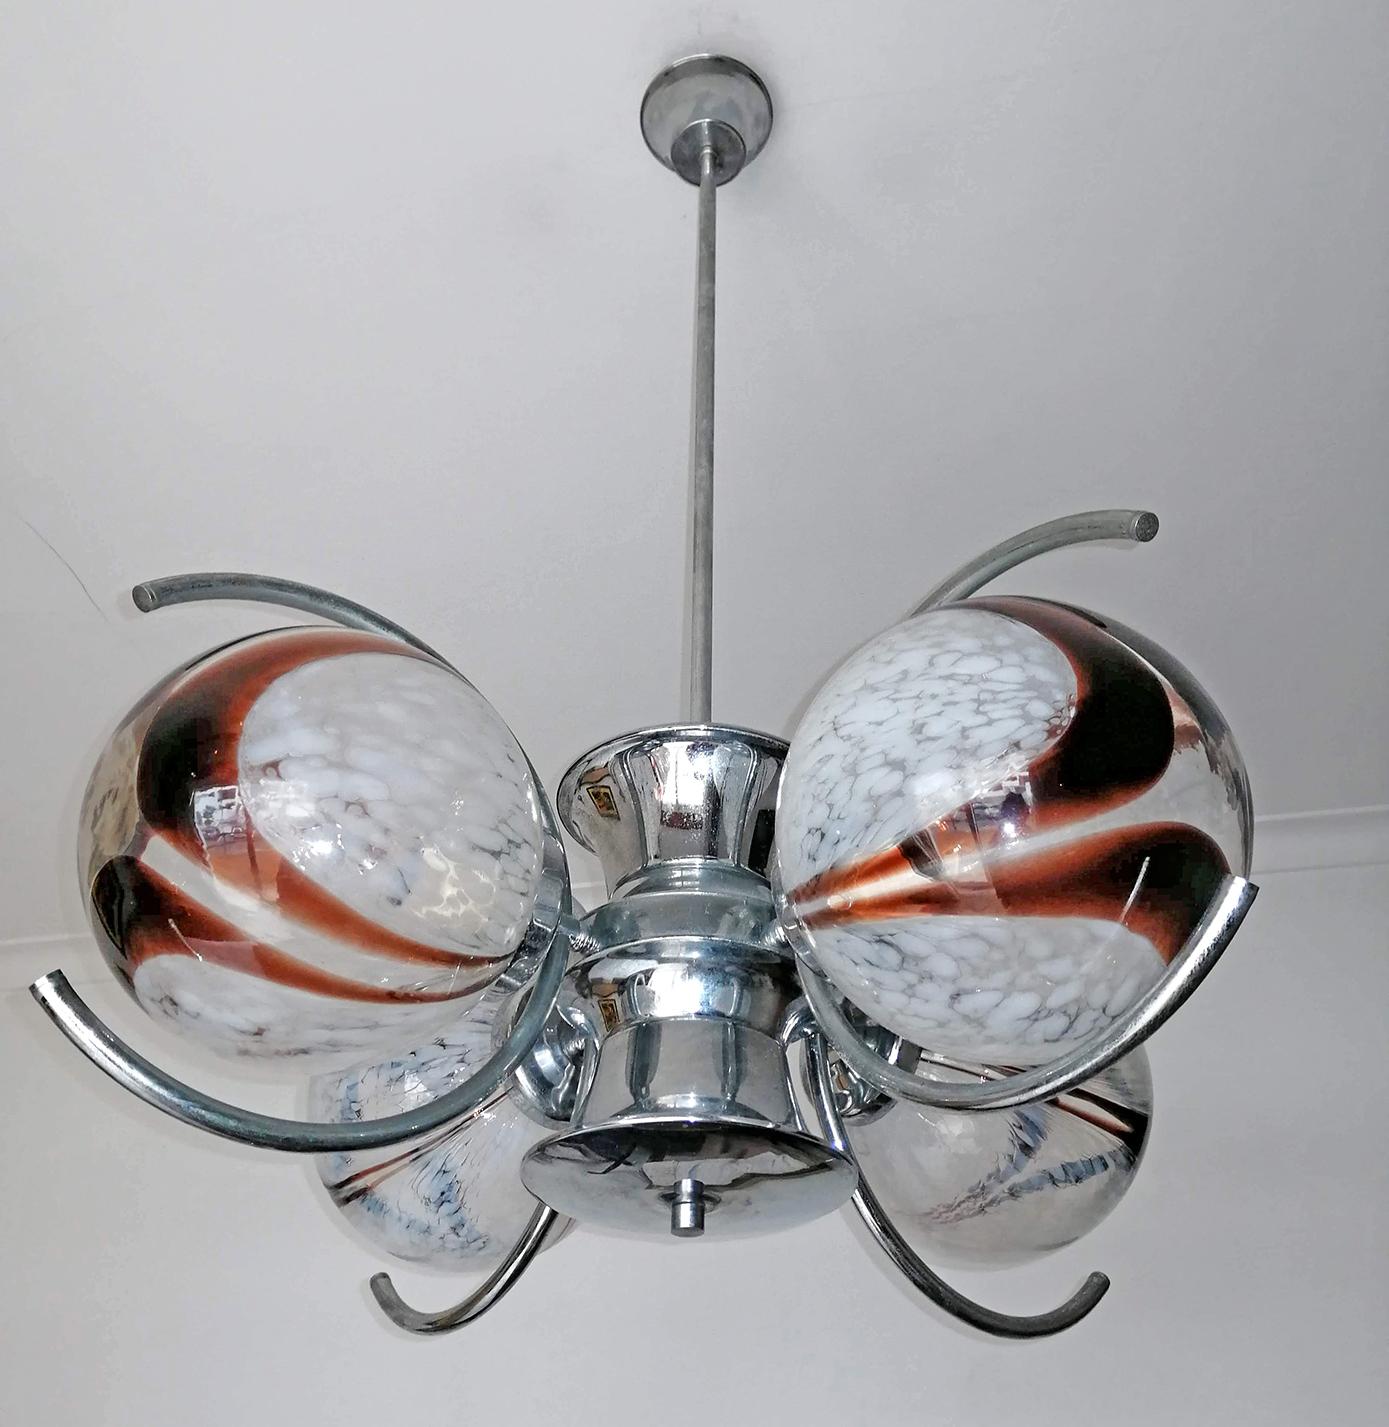 Unusual vintage 1960s Italian modernist Murano blown art glass globes chrome chandelier
Measures: Globe/diameter 8 in. (20 cm).

Measures:
Diameter 26 in / 66 cm
Height 35.4 in / 90 cm
Weight 16 lb/ 7 Kg
Four light bulbs E27/ good working condition
